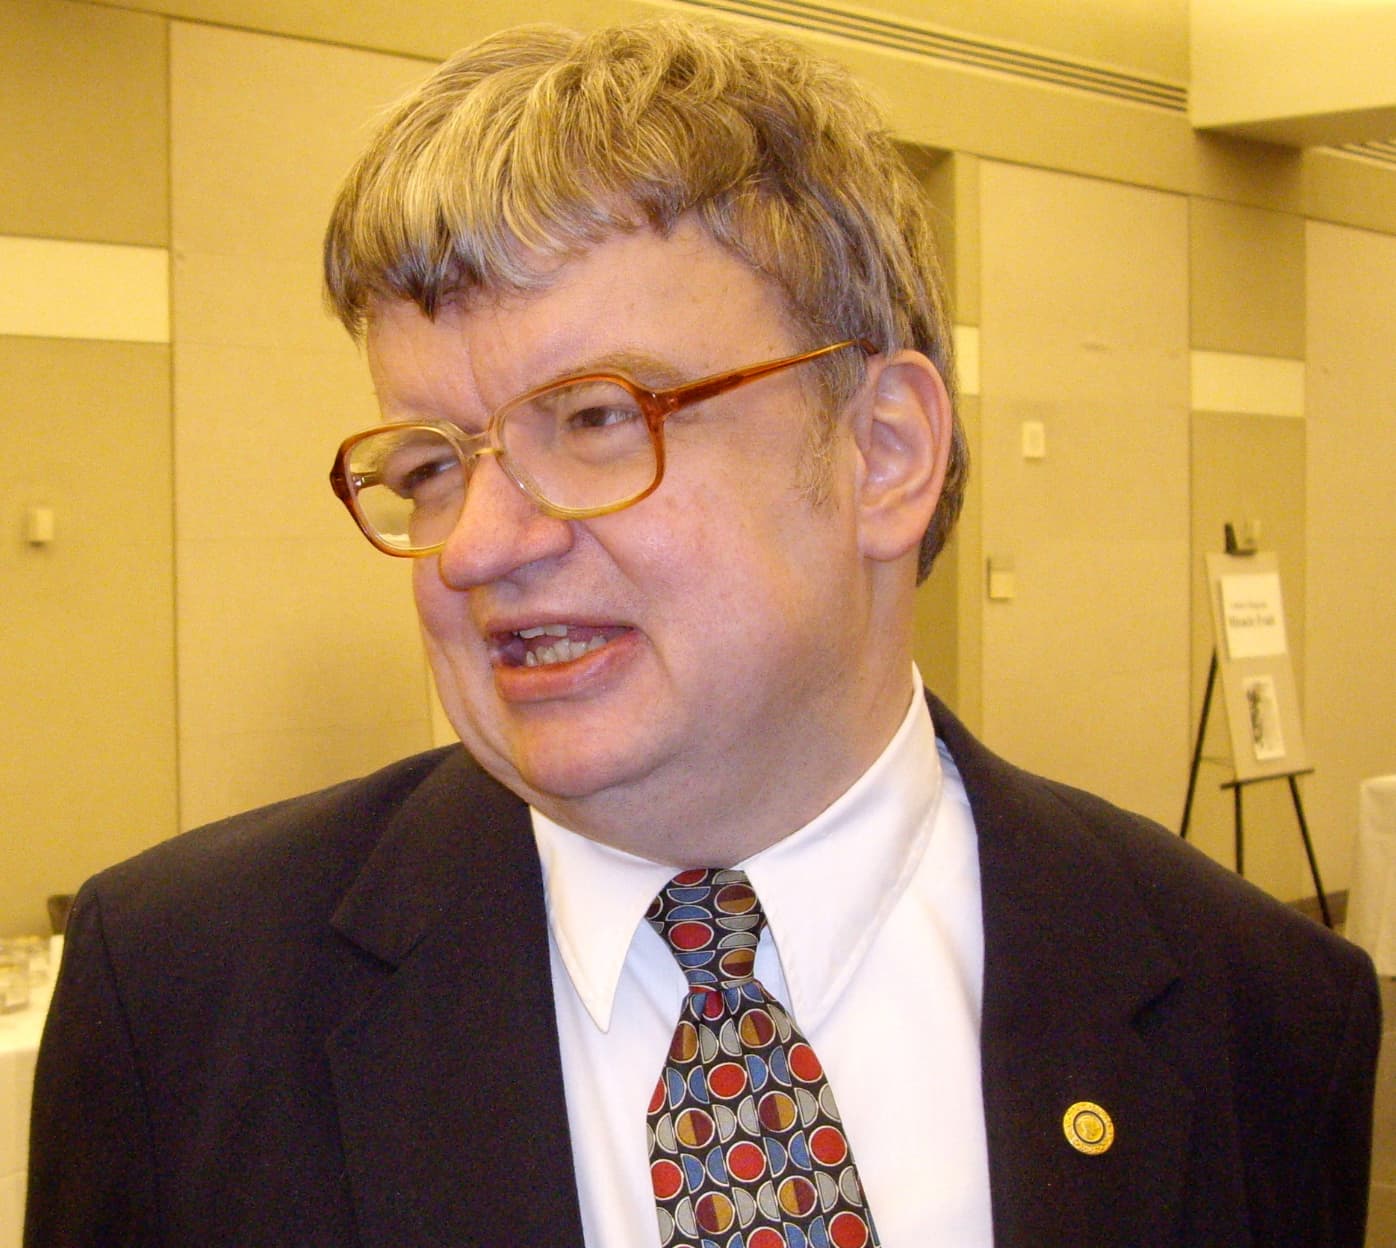  “TIL that the movie character Raymond from the Academy Award winning movie Rain man was based on real life savant, Kim Peek. He could simultaneously read the left side and right side pages of a book at the same time and had complete memory of over 12,000 books.”